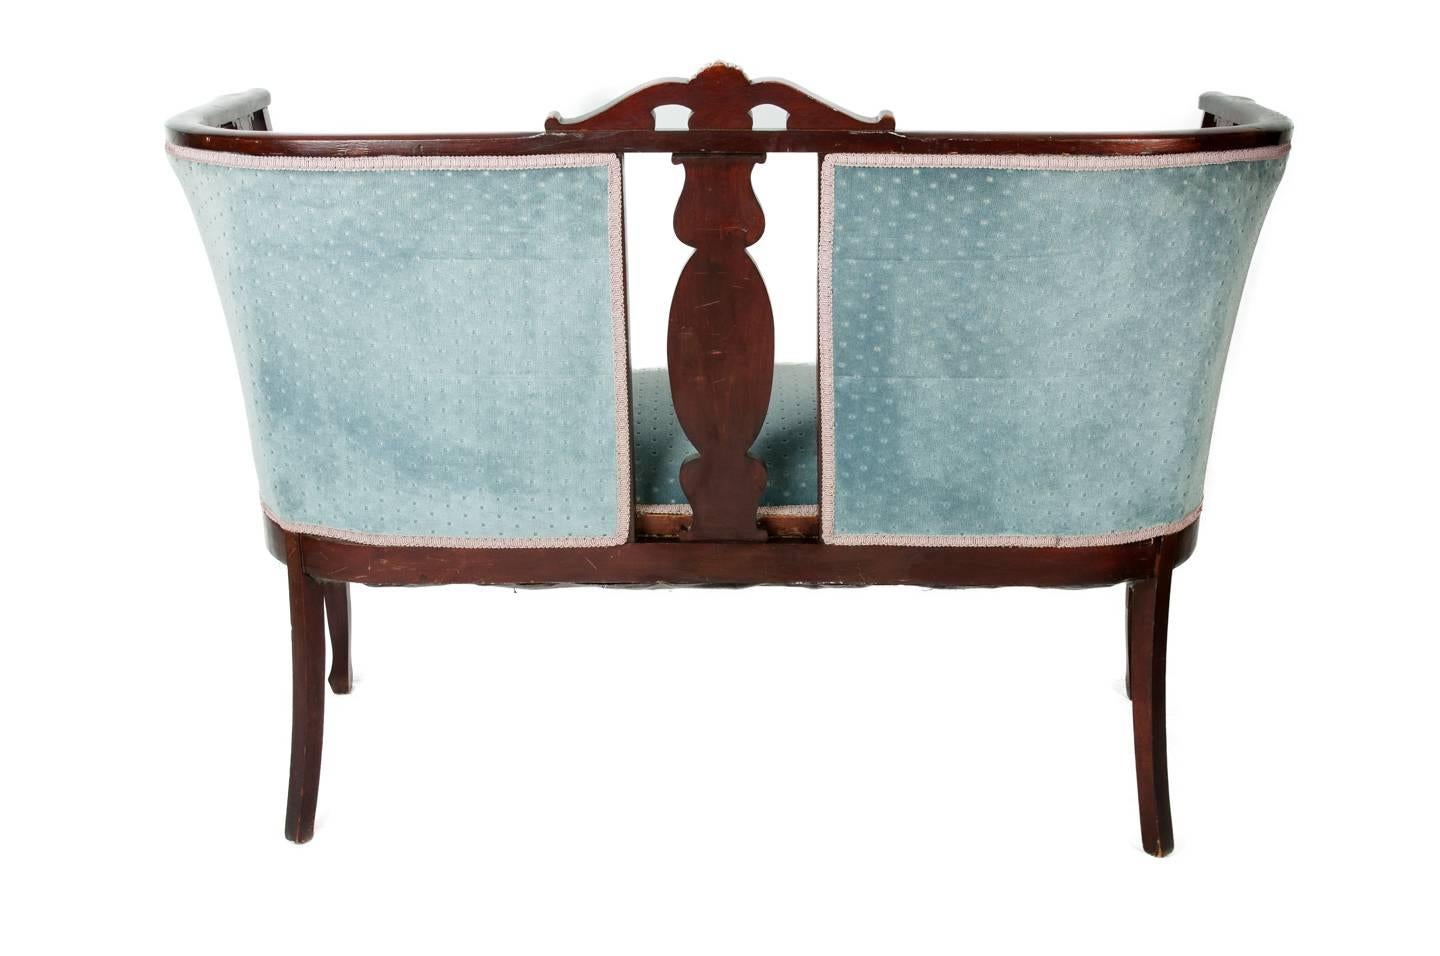 Victorian-style mahogany settee upholstered in turquoise velvet with tufted back.